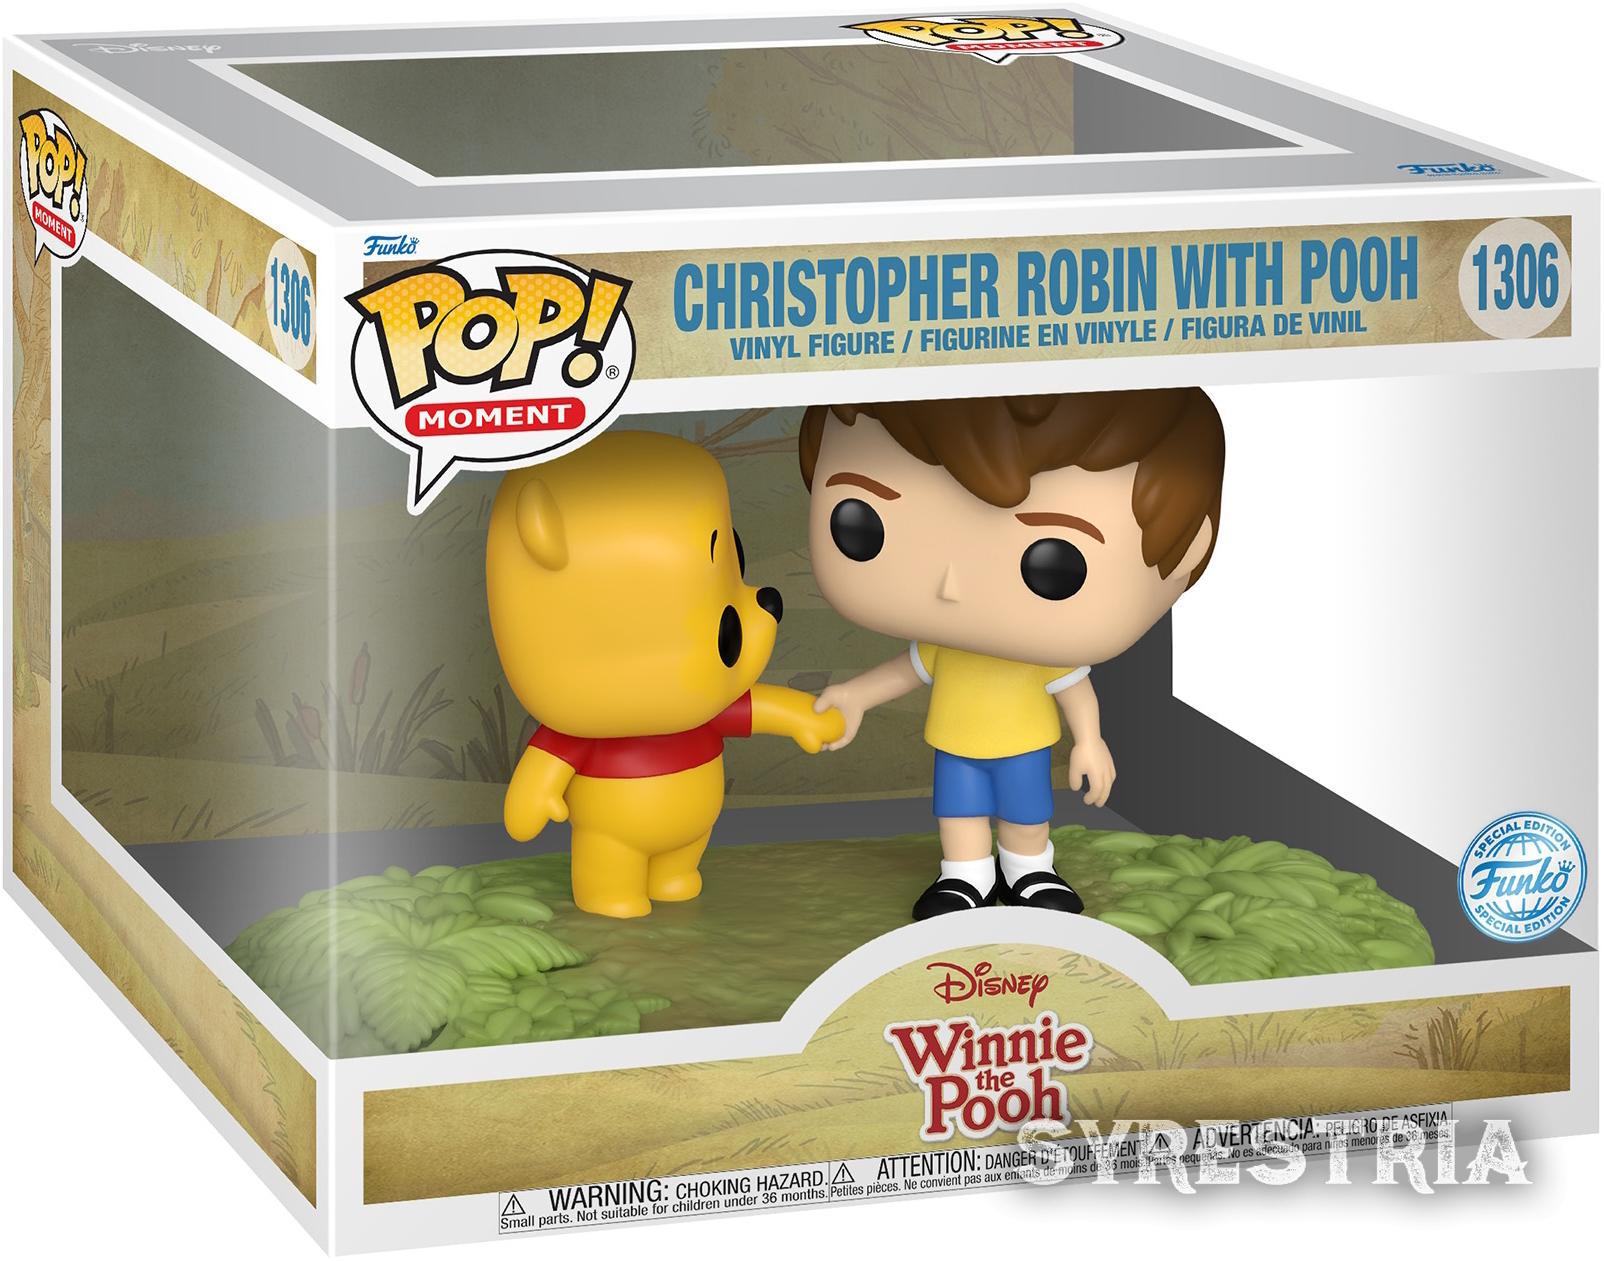 Disney Winnie The Pooh - Christopher Robin with Pooh 1306  Special Edition - Funko Moments Pop!